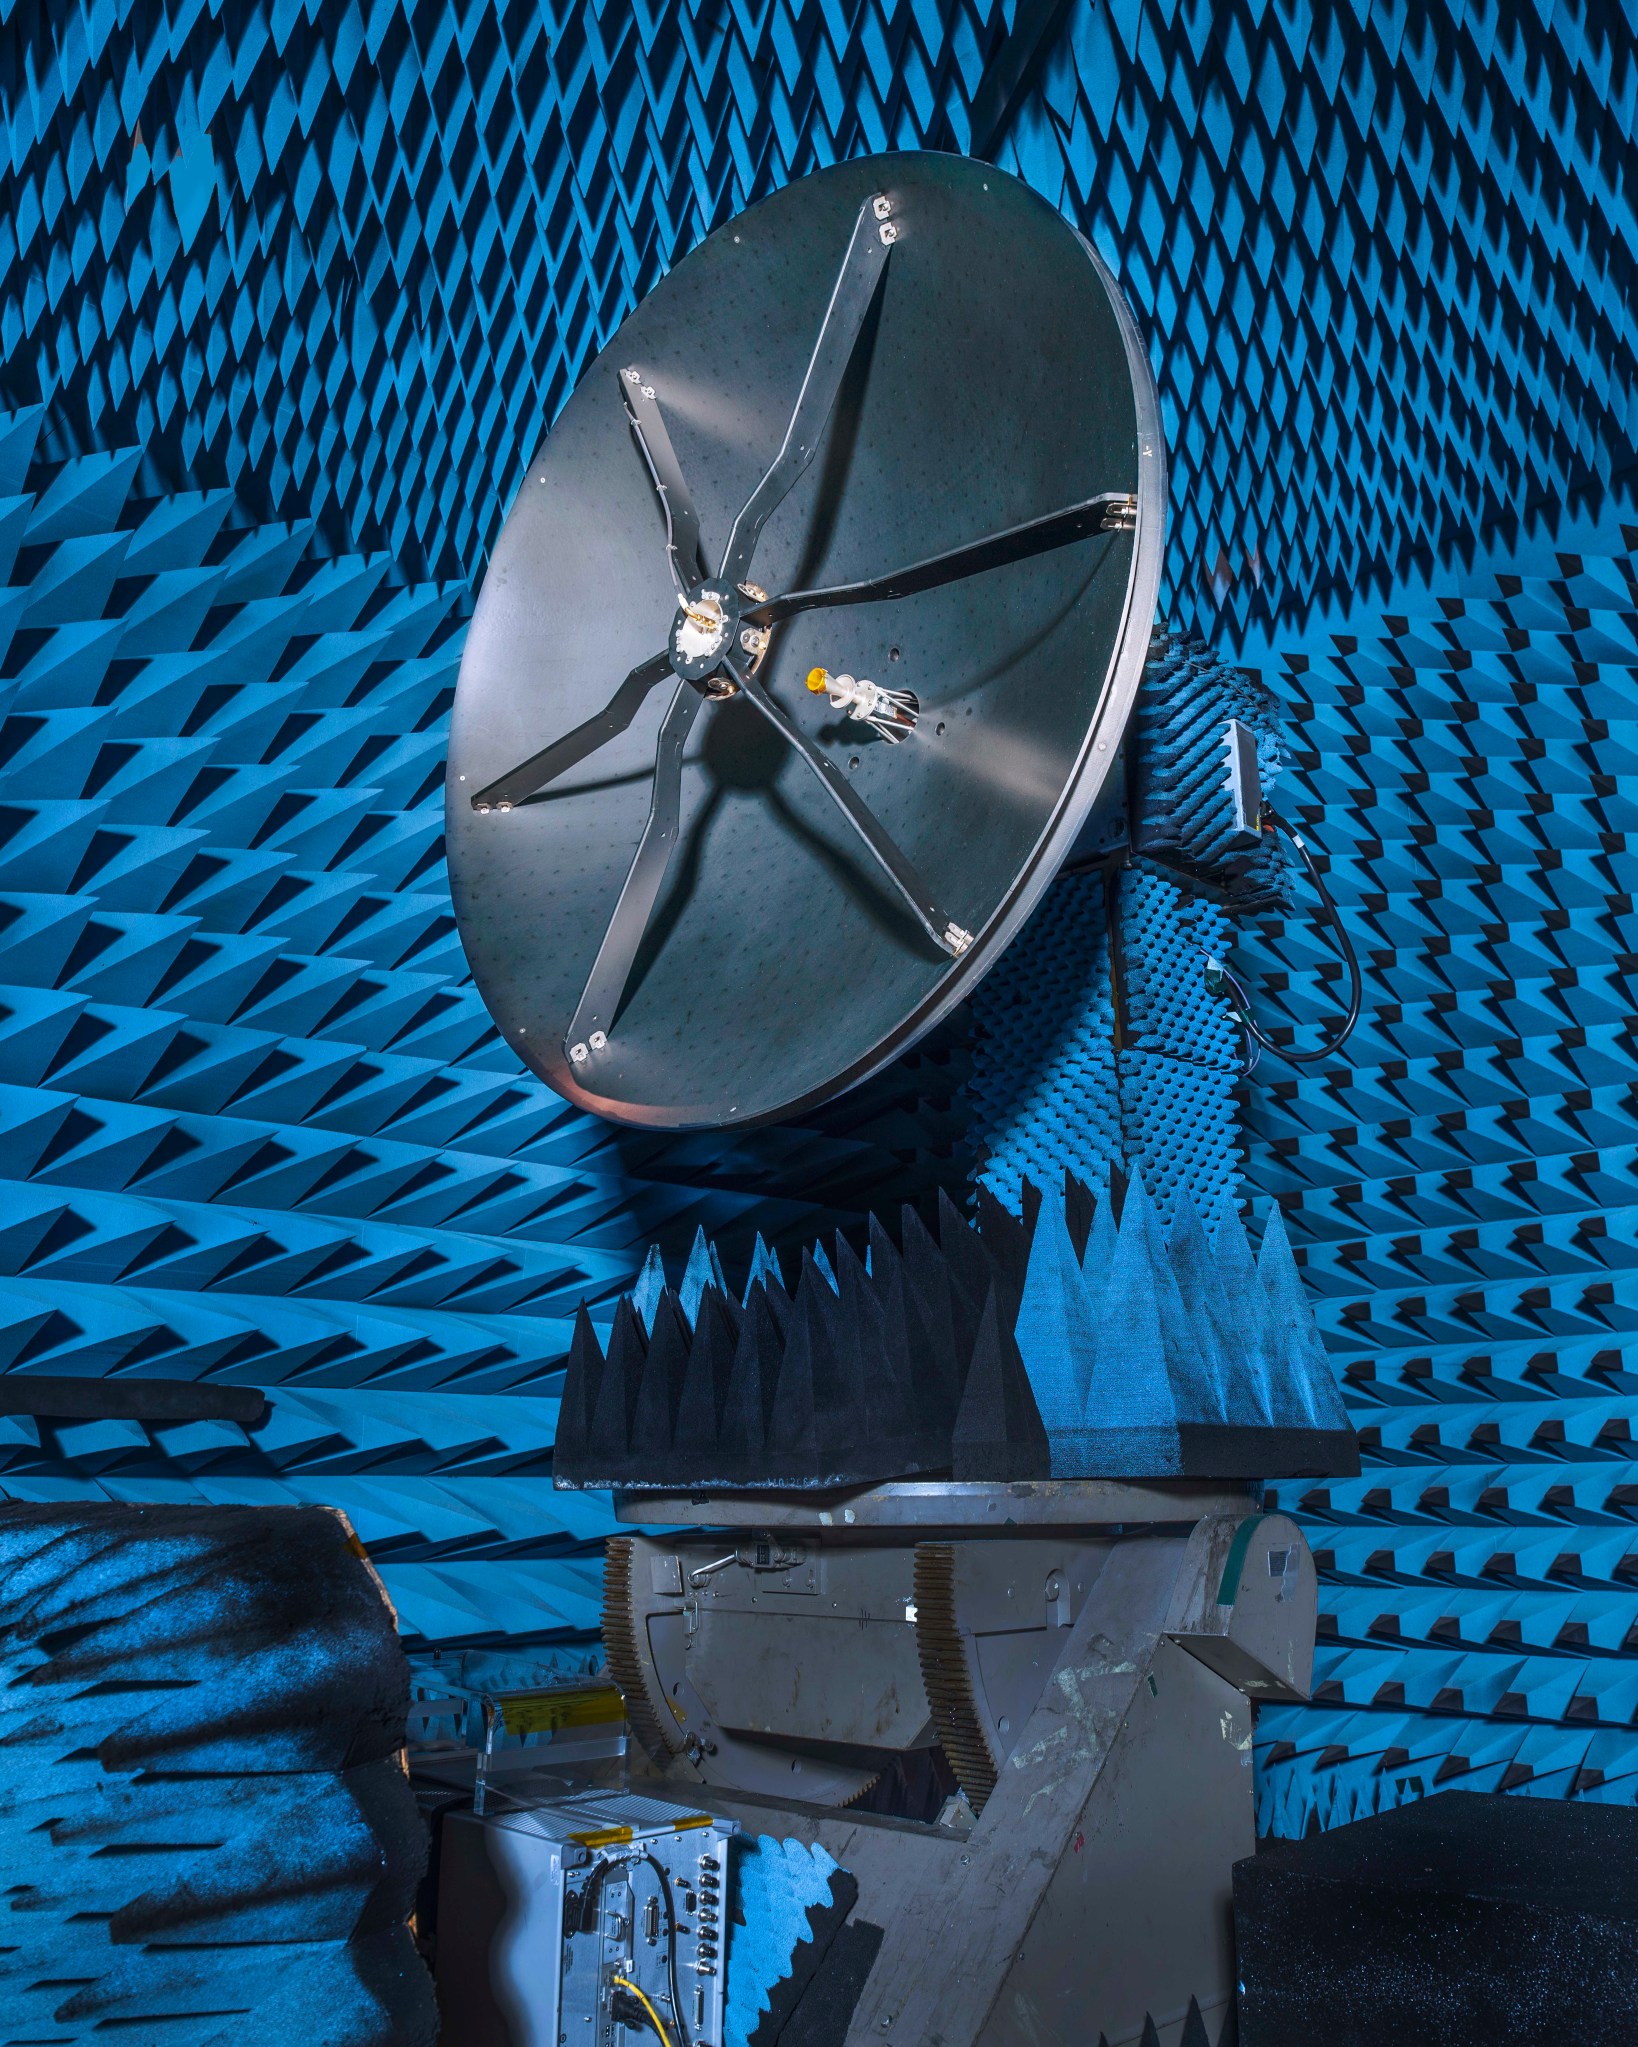 Roman’s high-gain antenna - a large, gray dish, about the height of a refrigerator, in a test chamber that is covered in blue spiked-shaped foam. A small circle is elevated in the middle of the antenna disk by six metal strips.